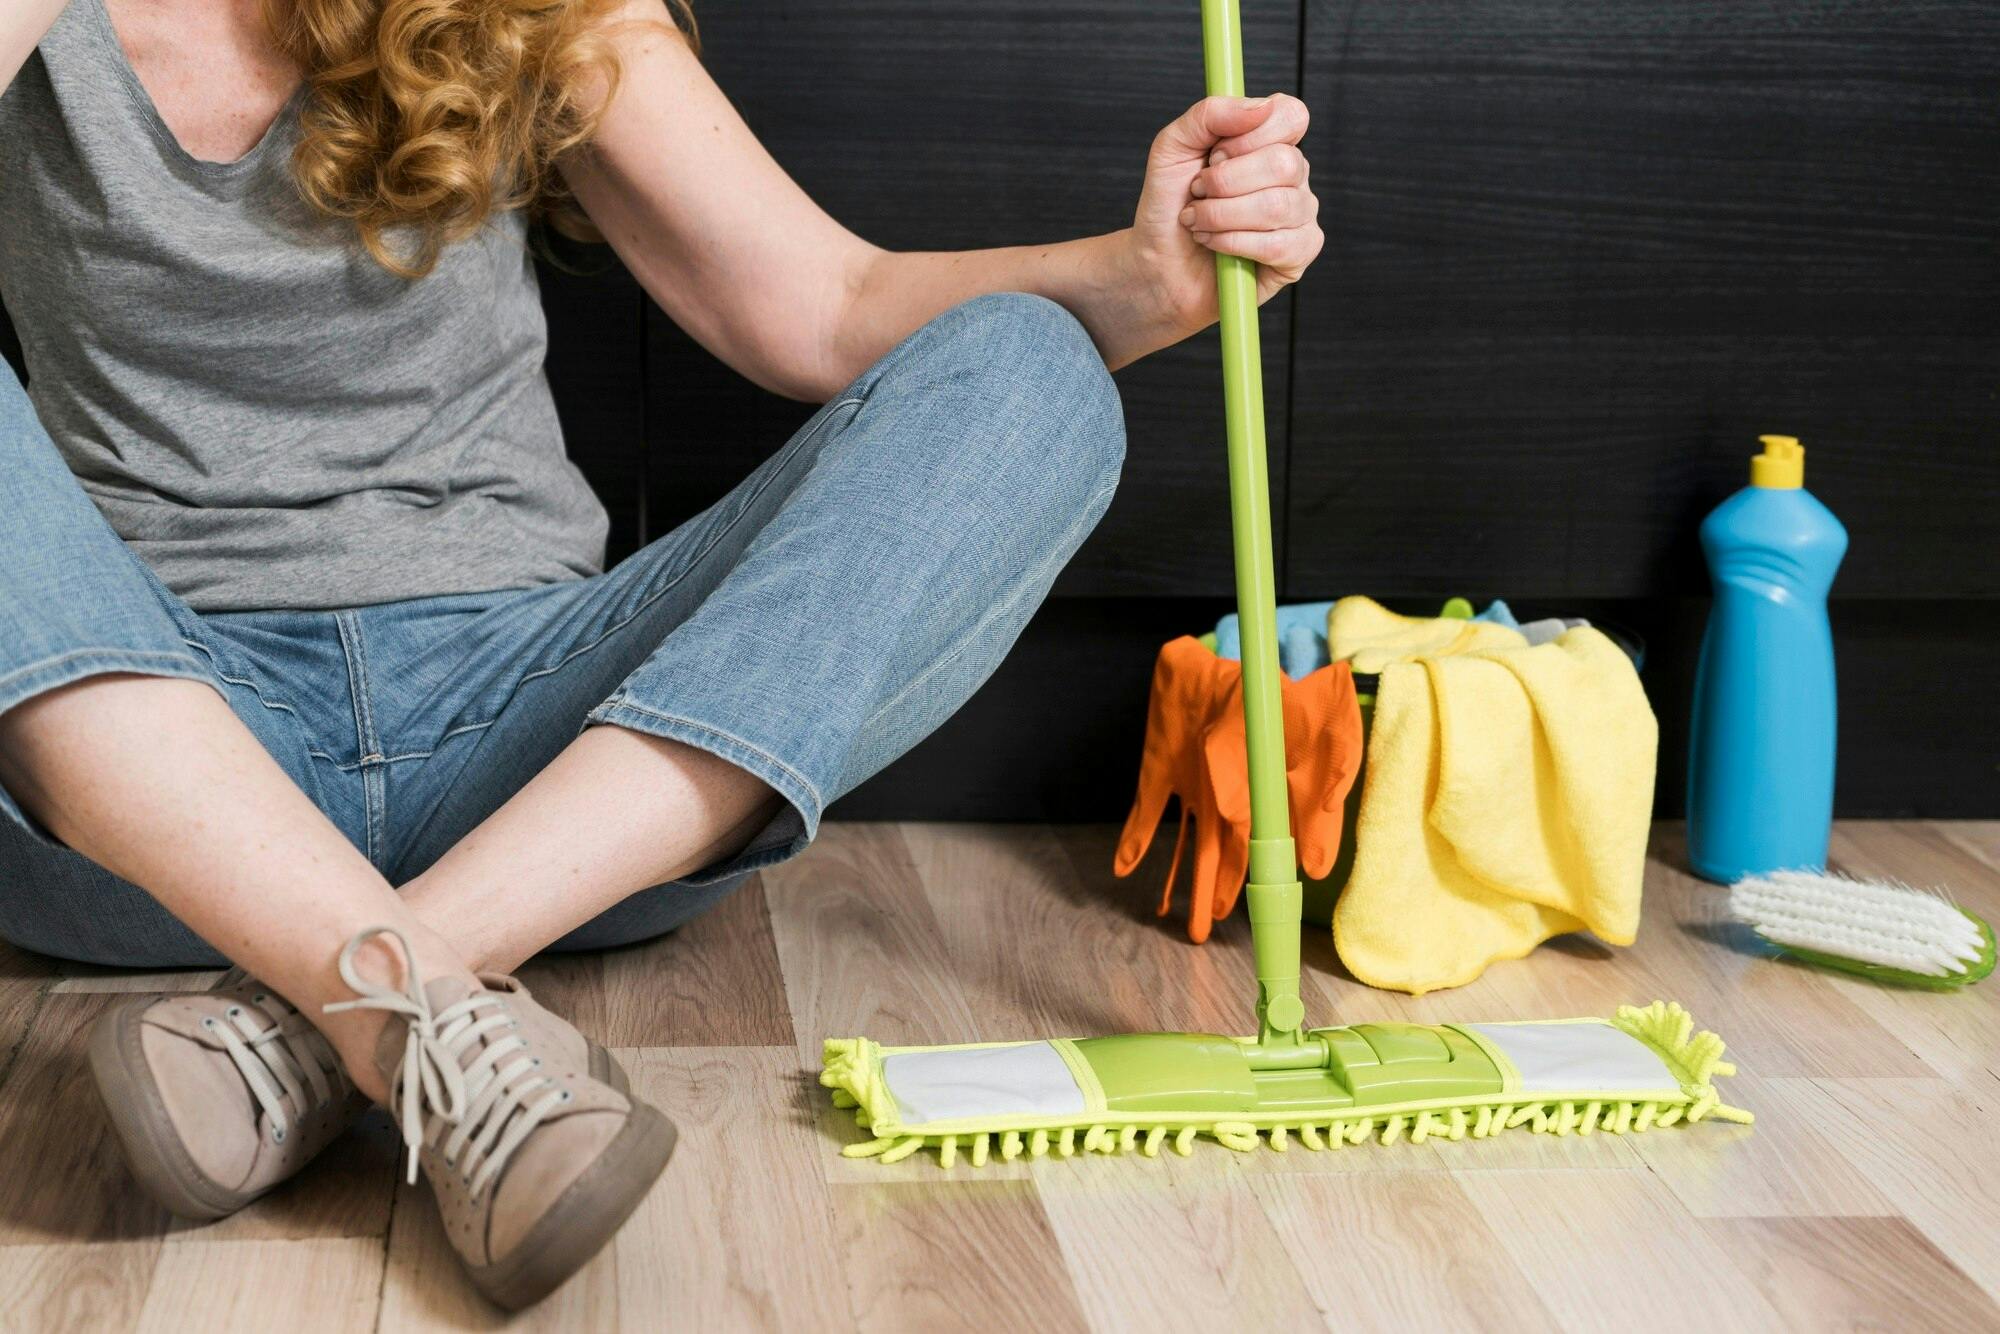 Bond Cleaning Melbourne Review: An Award-Winning Bond Cleaning Company in Melbourne